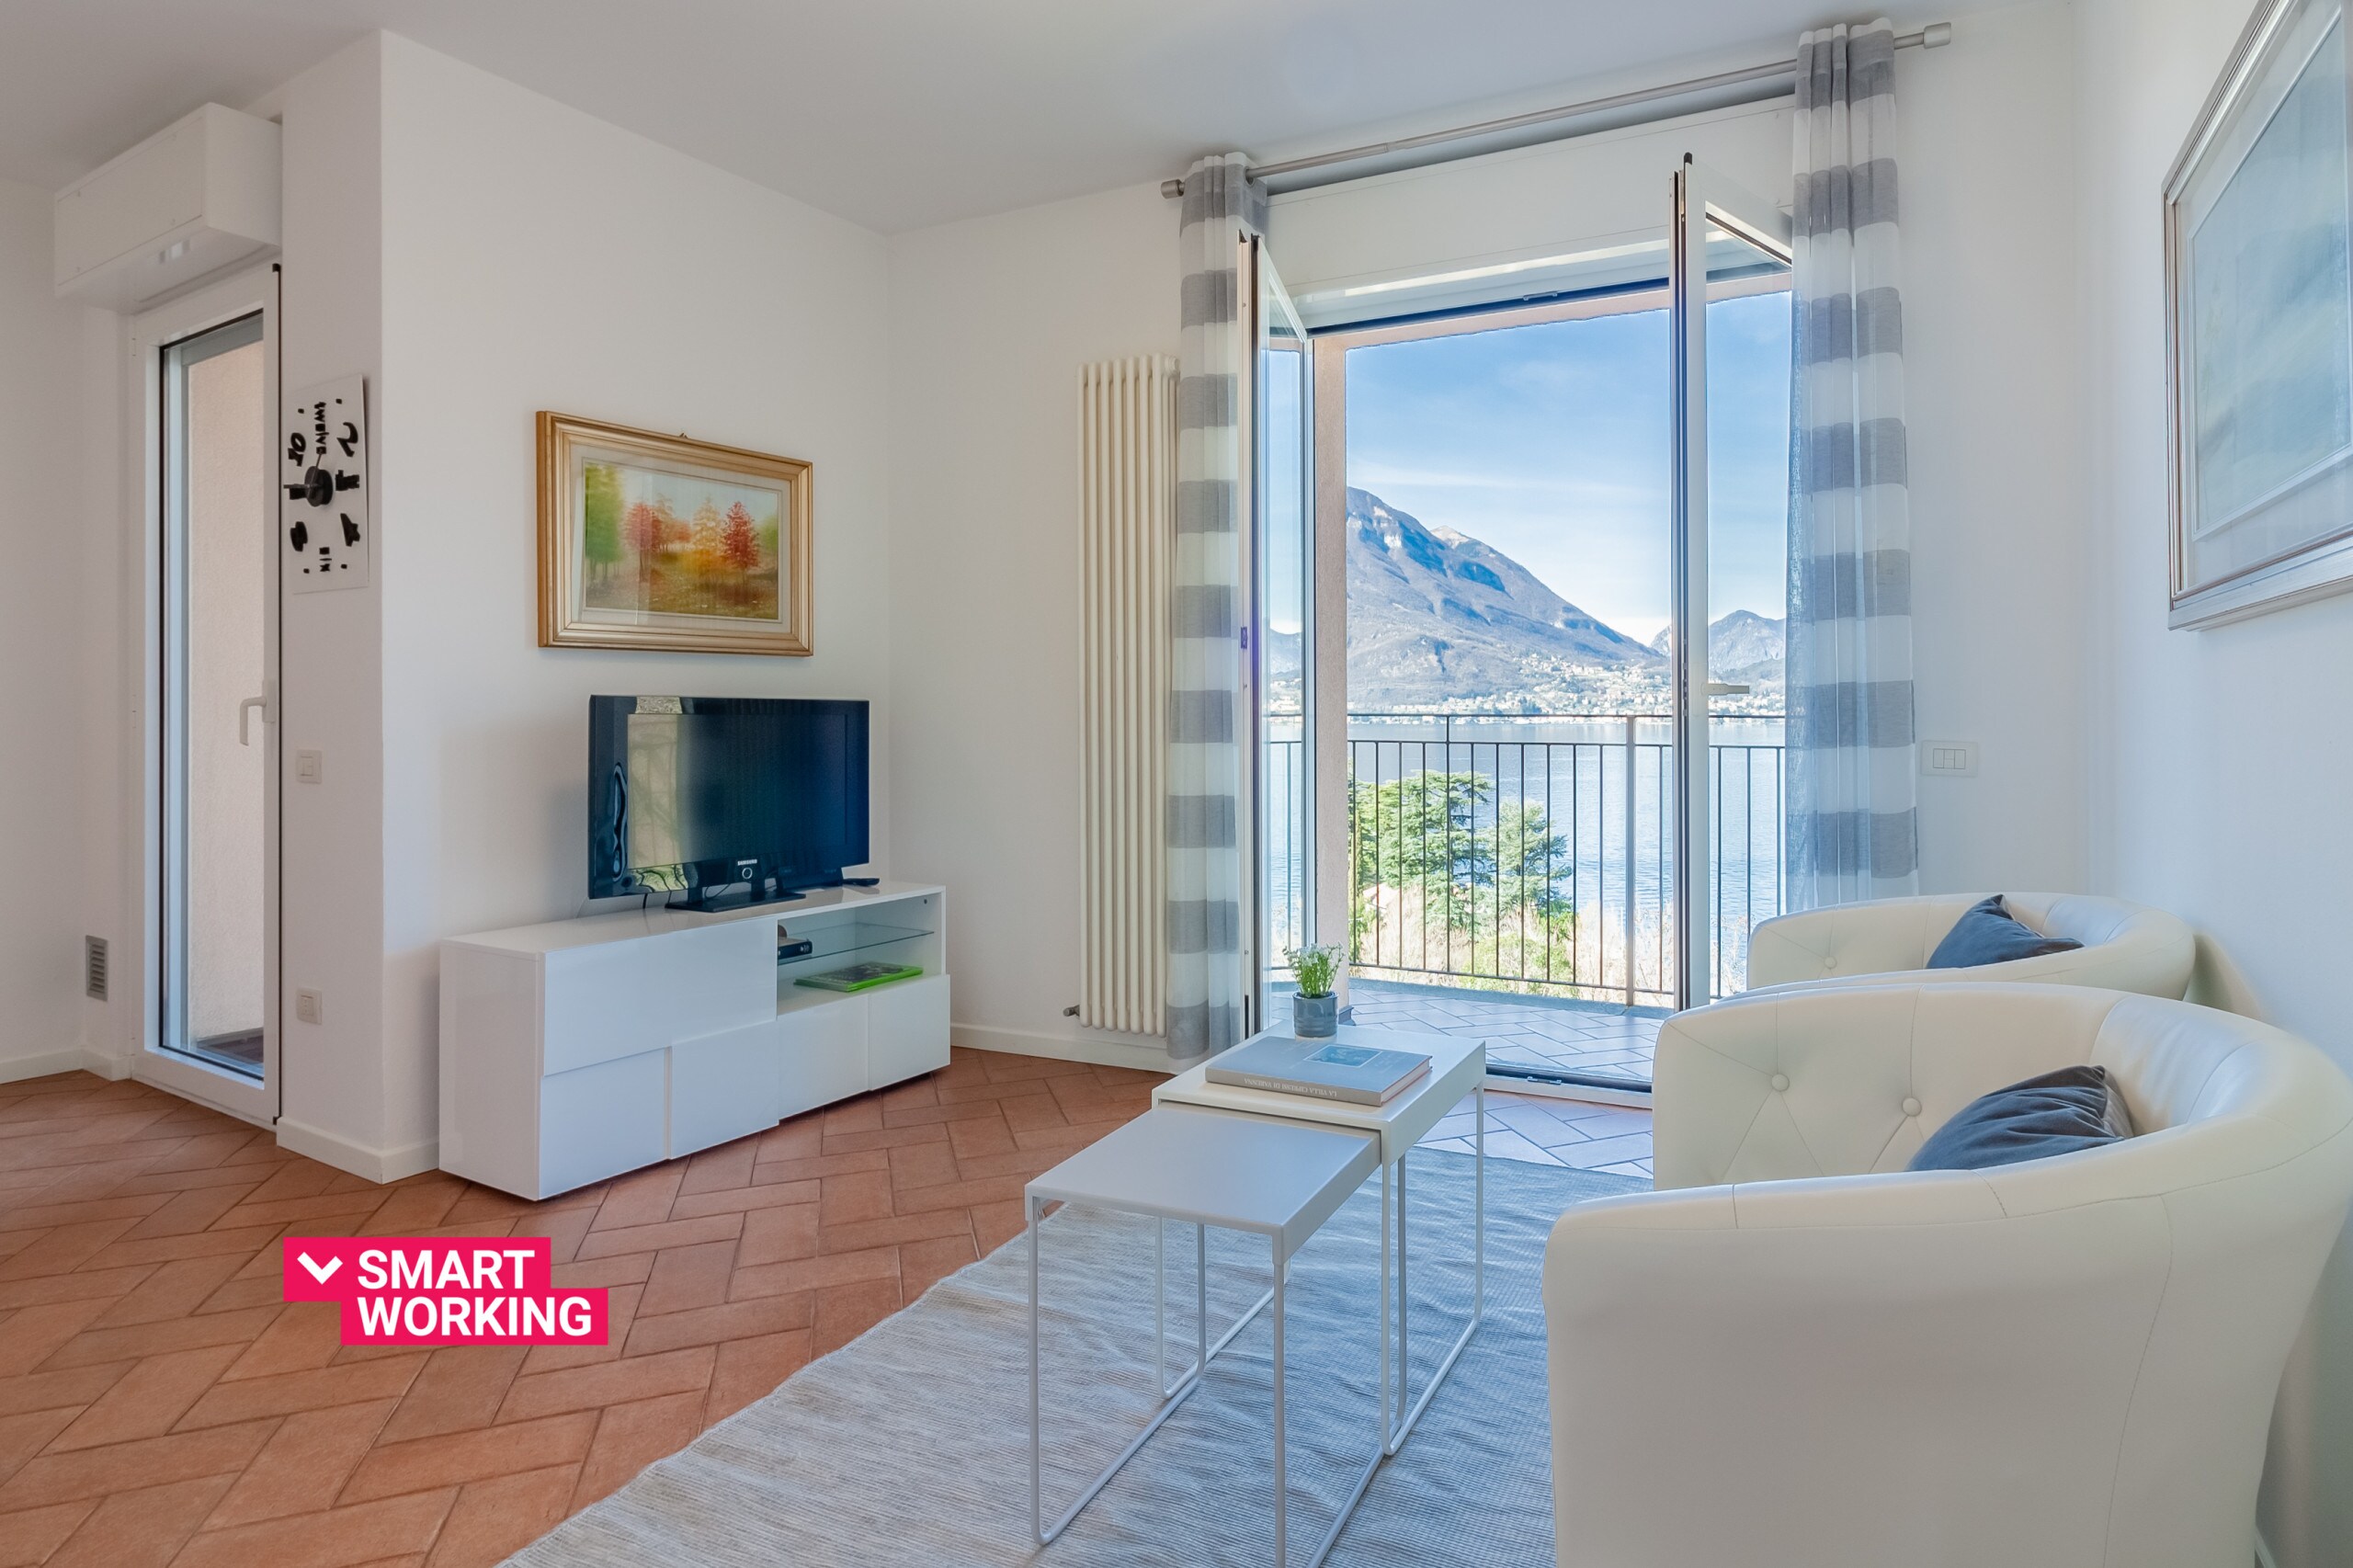 Property Image 1 - Cozy apartment with balcony and beautiful lake view in Varenna